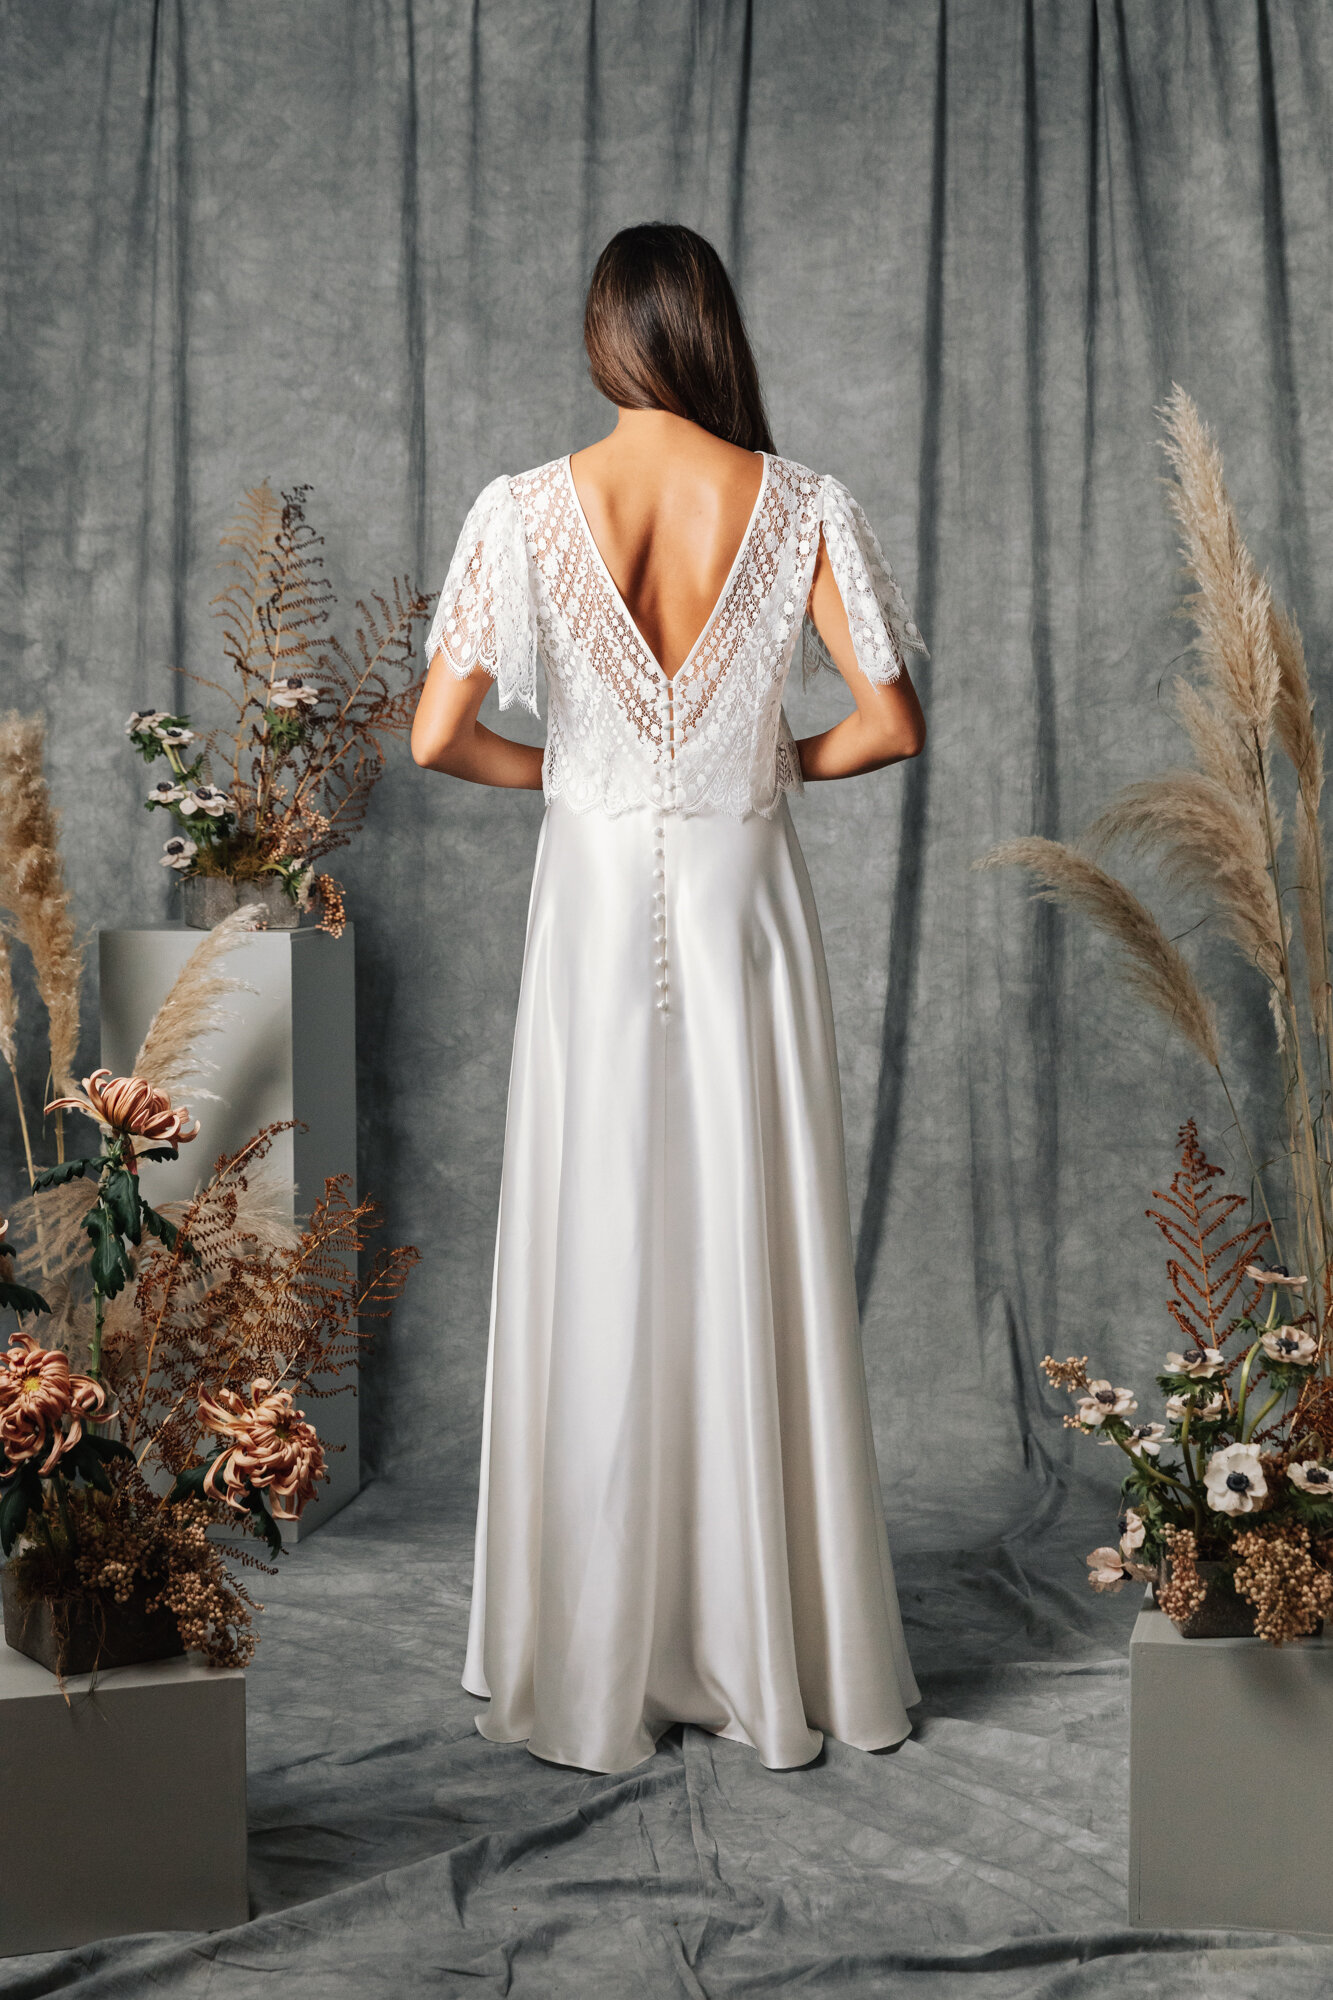 Christian Wedding Gown from Shiloh Bridals – Womenofvalor